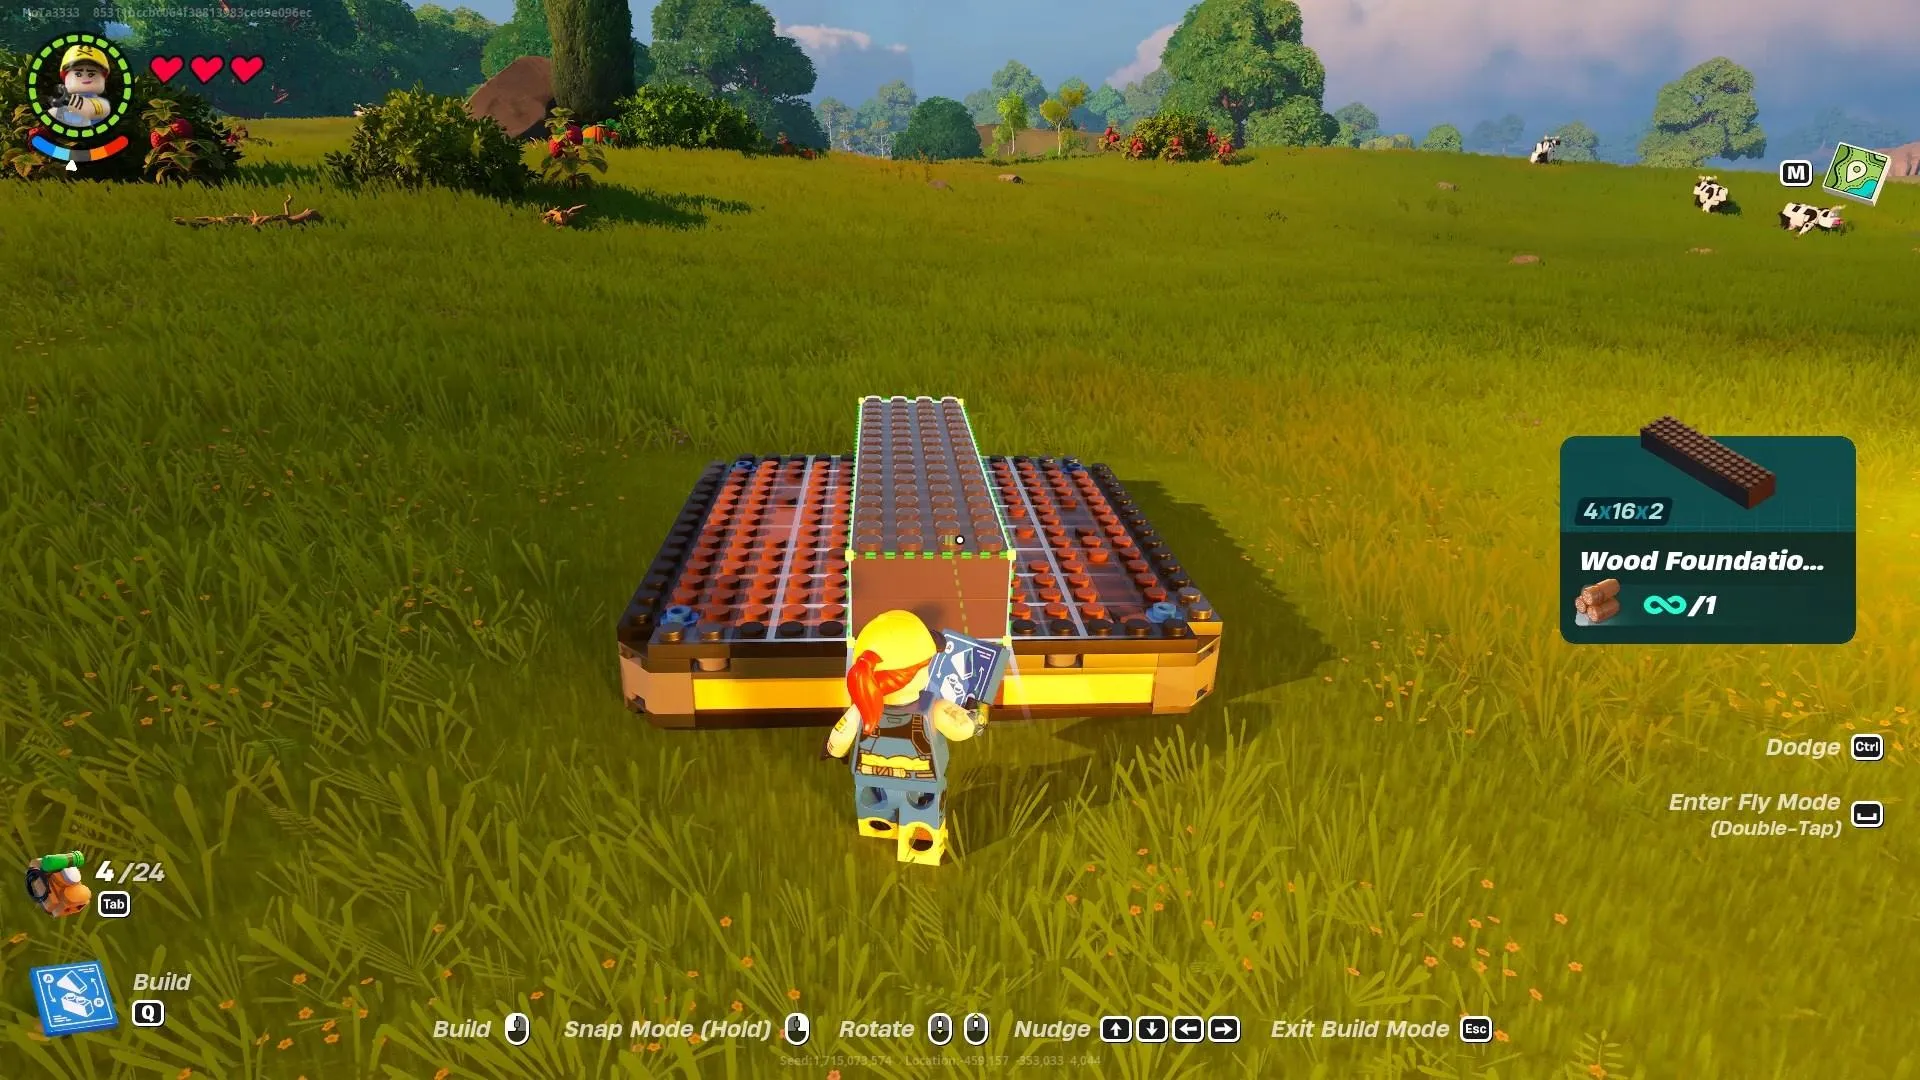 How To Build a Fully Functional Plane in LEGO Fortnite